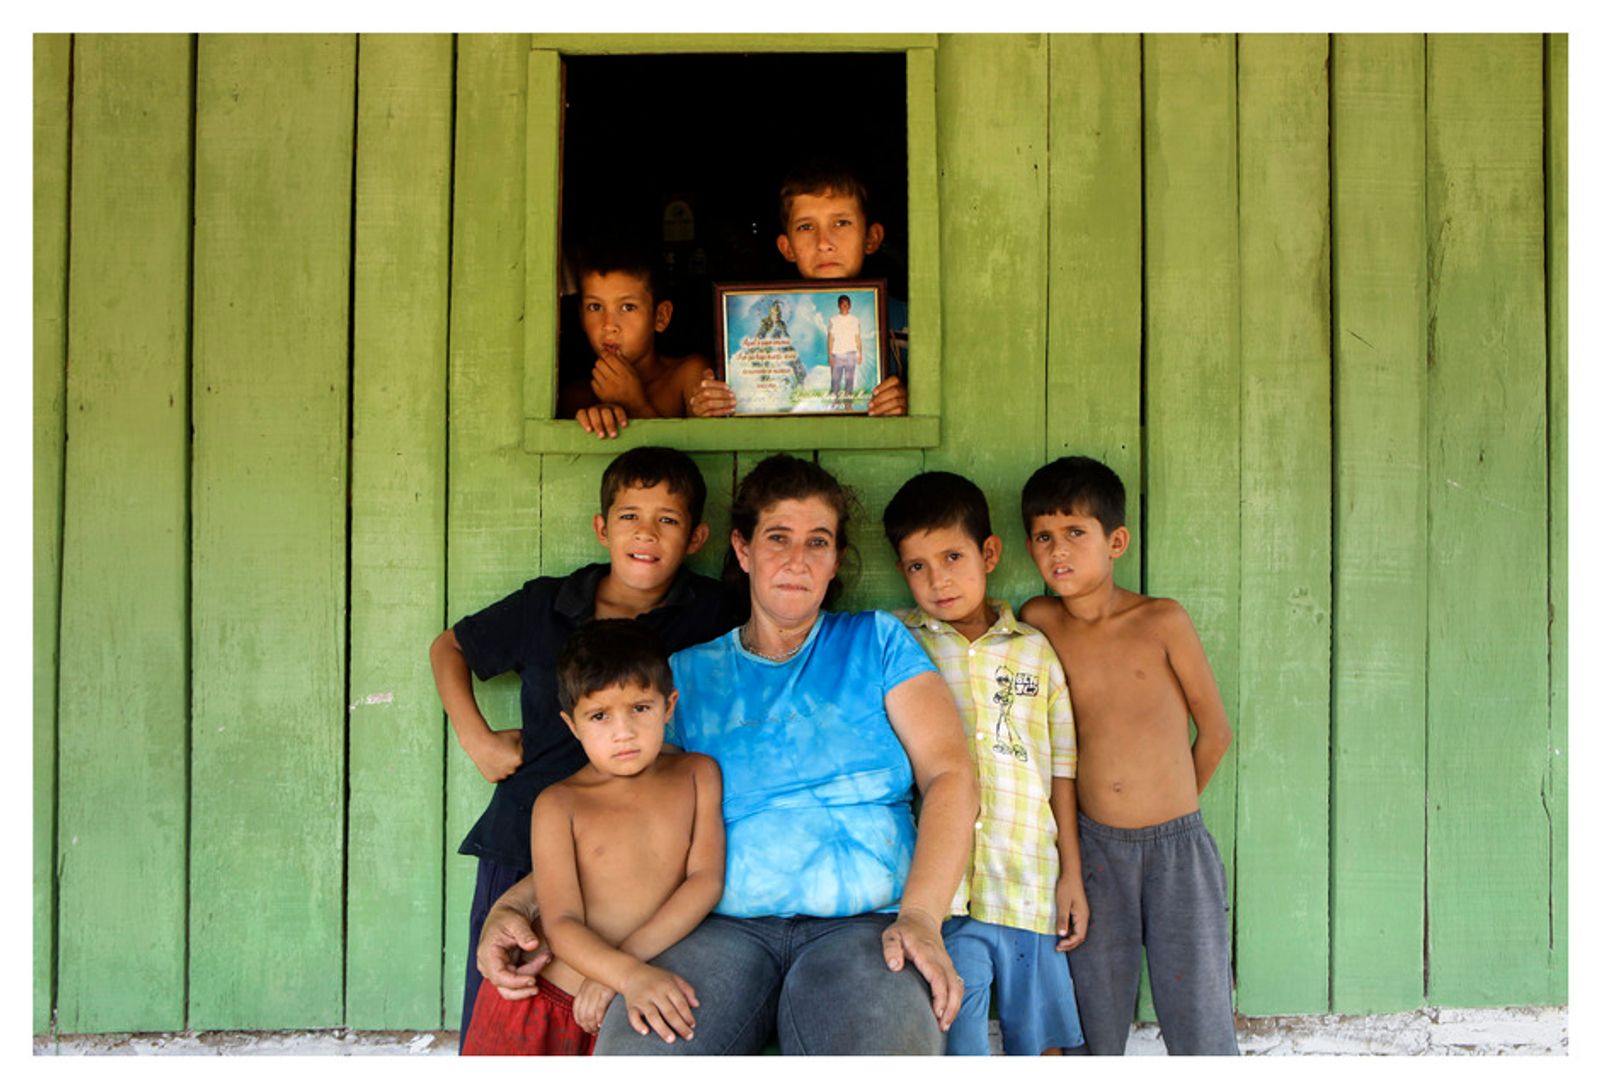 © Jorge Saenz - Image from the Clases, Paraguay 2003-2013 photography project